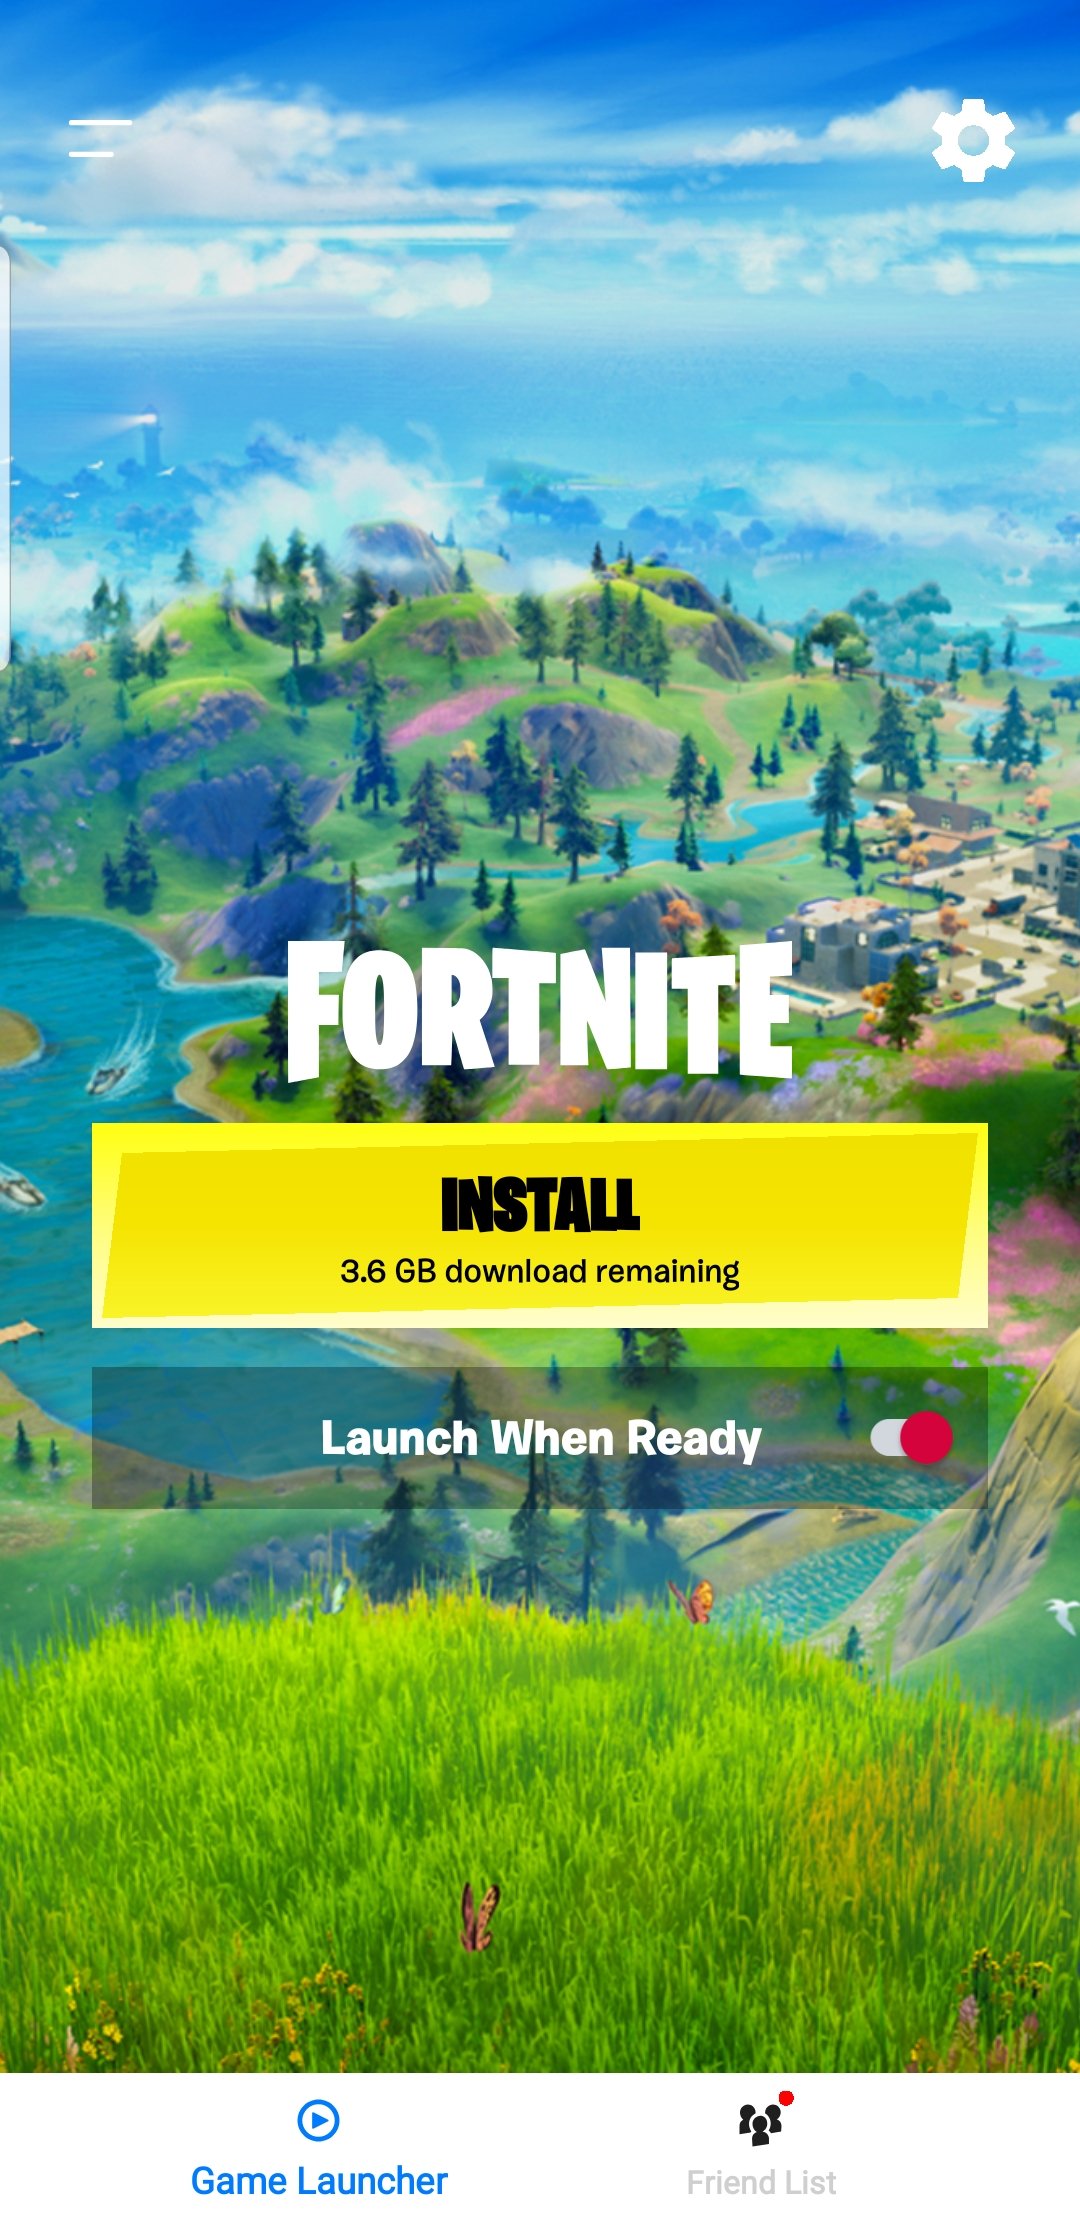 How To Download & Install Fortnite On Epic Games 